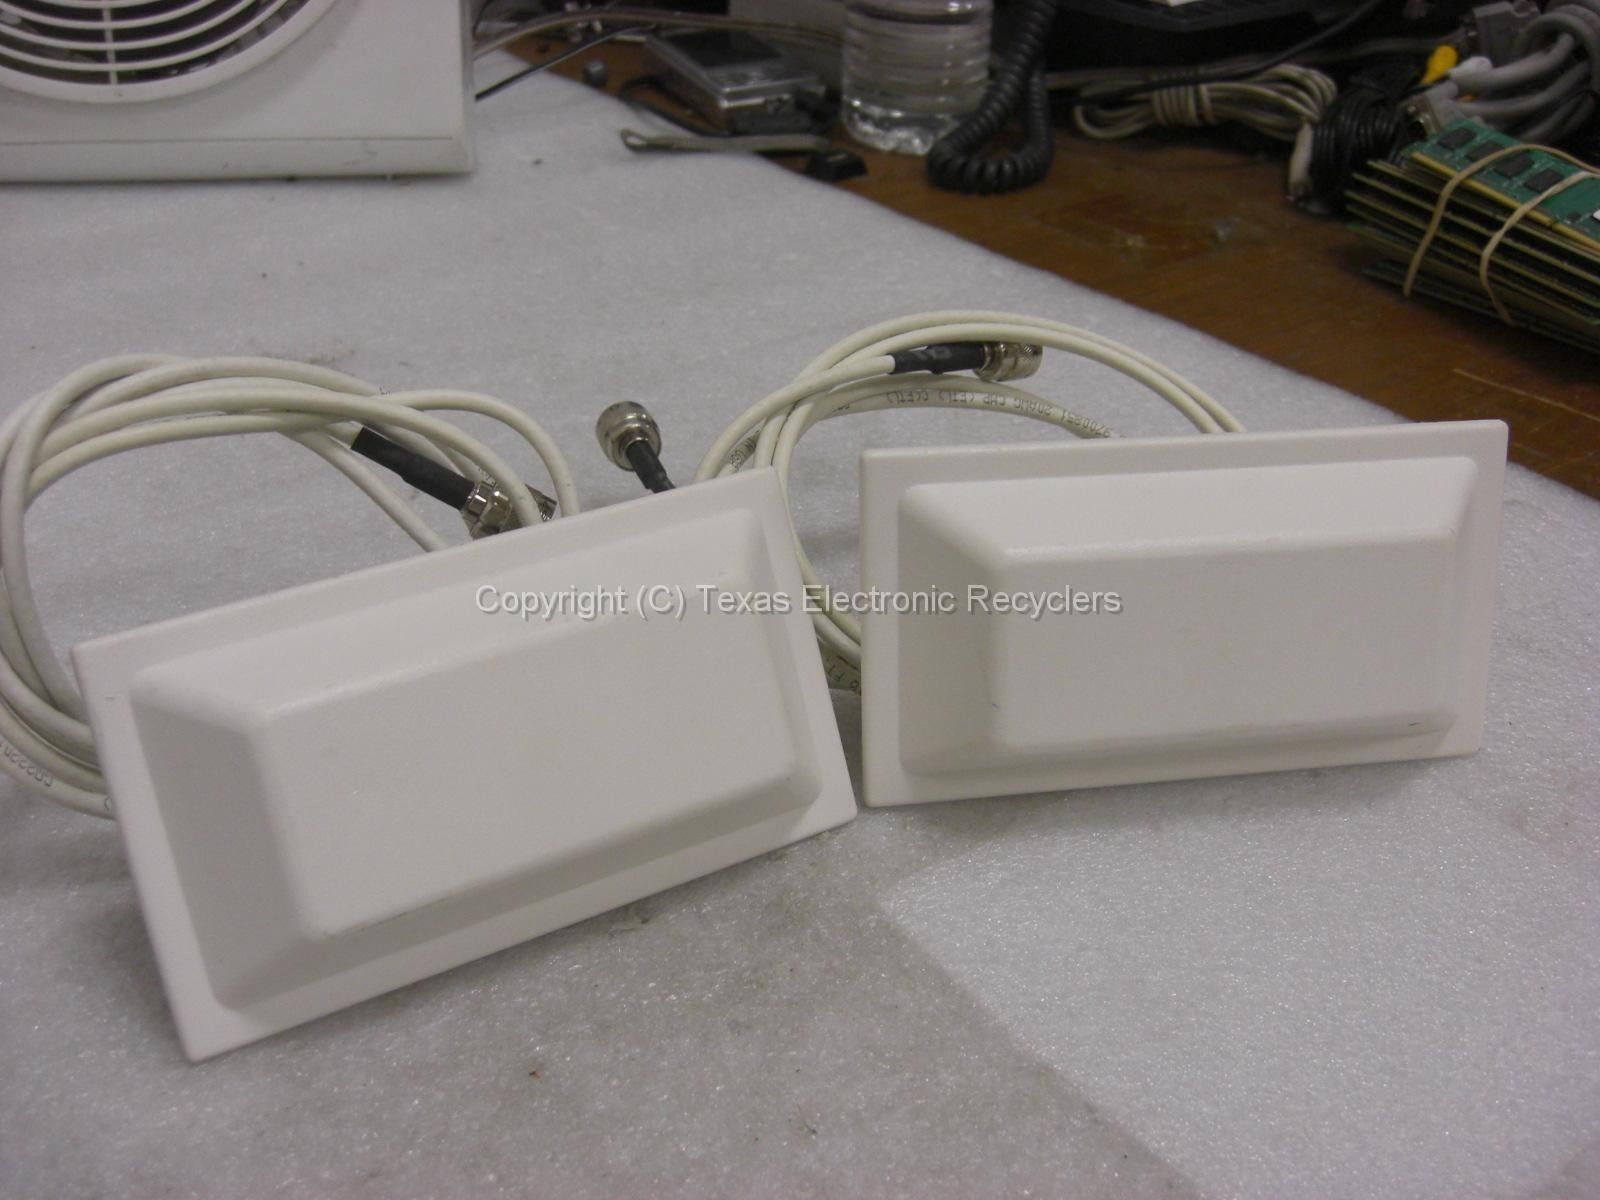 LOT OF TWO Cisco air-ant5959 2.4GHz 2dBi Div Omni Antenna